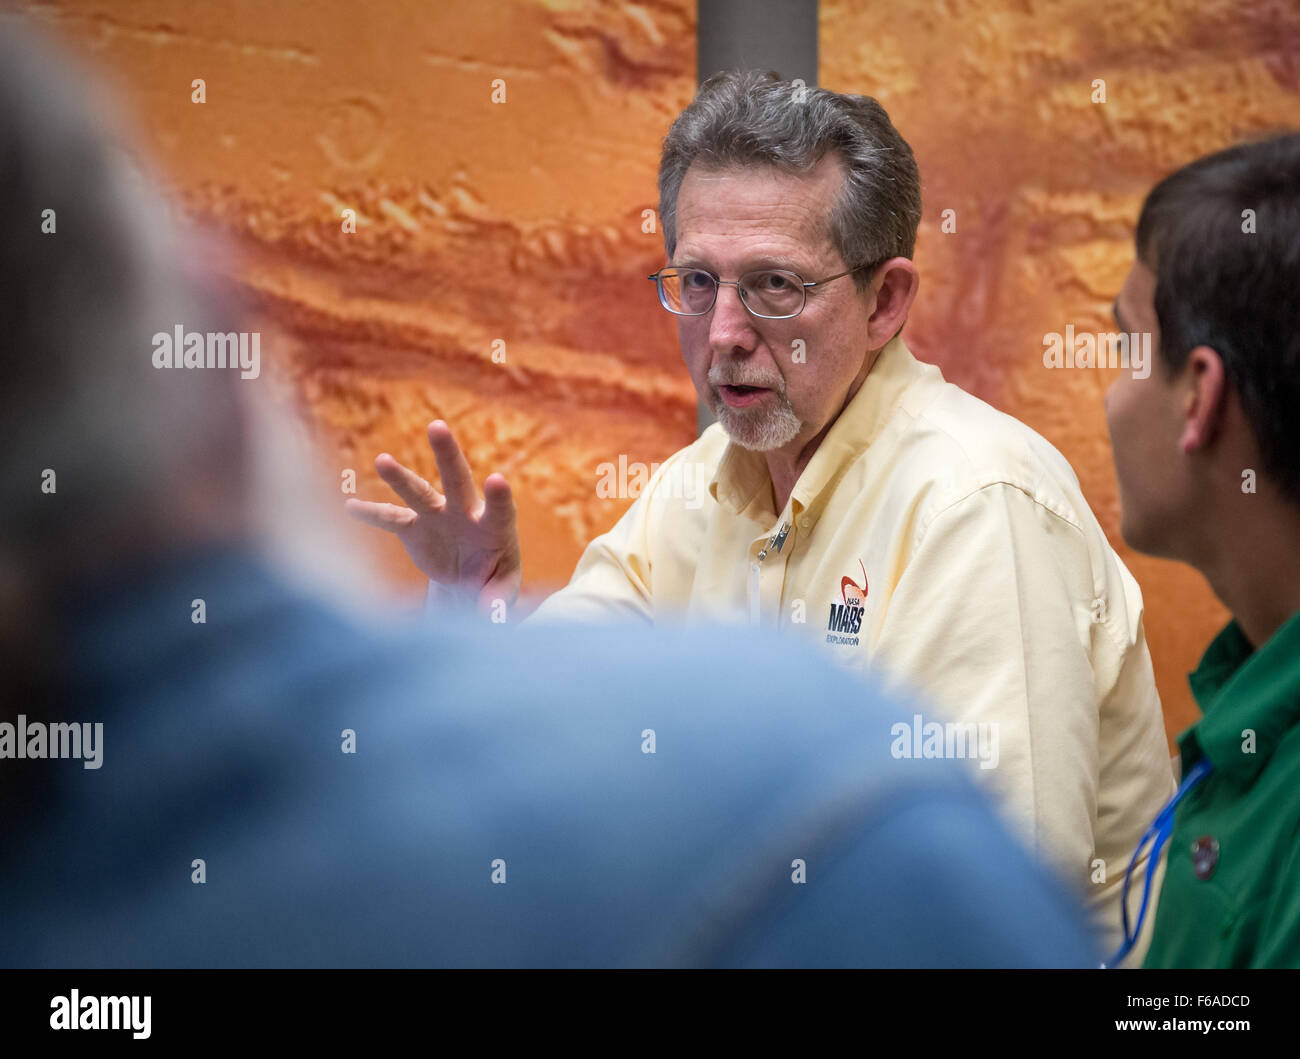 Jim Green, director of the Planetary Science Division at NASA Headquarters, answers reporter's questions following the First Landing Site/Exploration Zone Workshop for Human Missions to the Surface of Mars held at the Lunar and Planetary Institute, Friday, Oct. 30, 2015, in Houston, Texas. The agency is hosting the workshop to collect proposals for locations on Mars that would be of high scientific research value while also providing natural resources to enable human explorers to land, live and work safely on the Red Planet. Photo Credit: (NASA/Bill Ingalls) Stock Photo